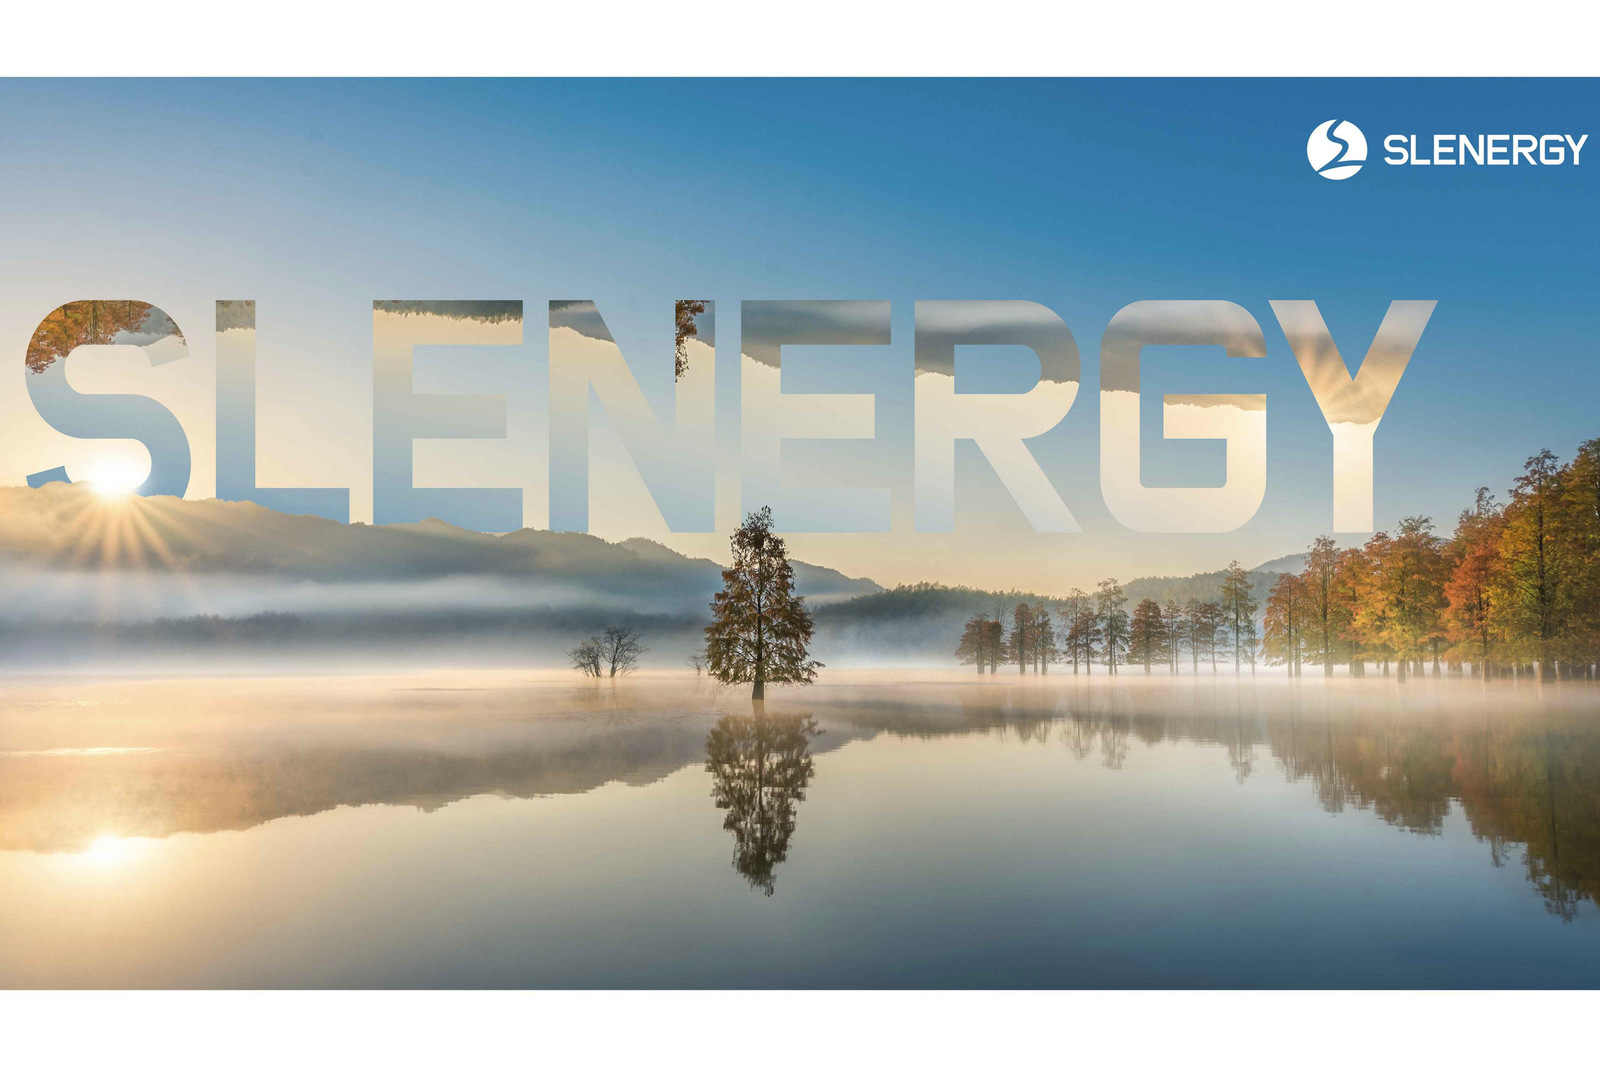 Slenergy to make its debut in Europe